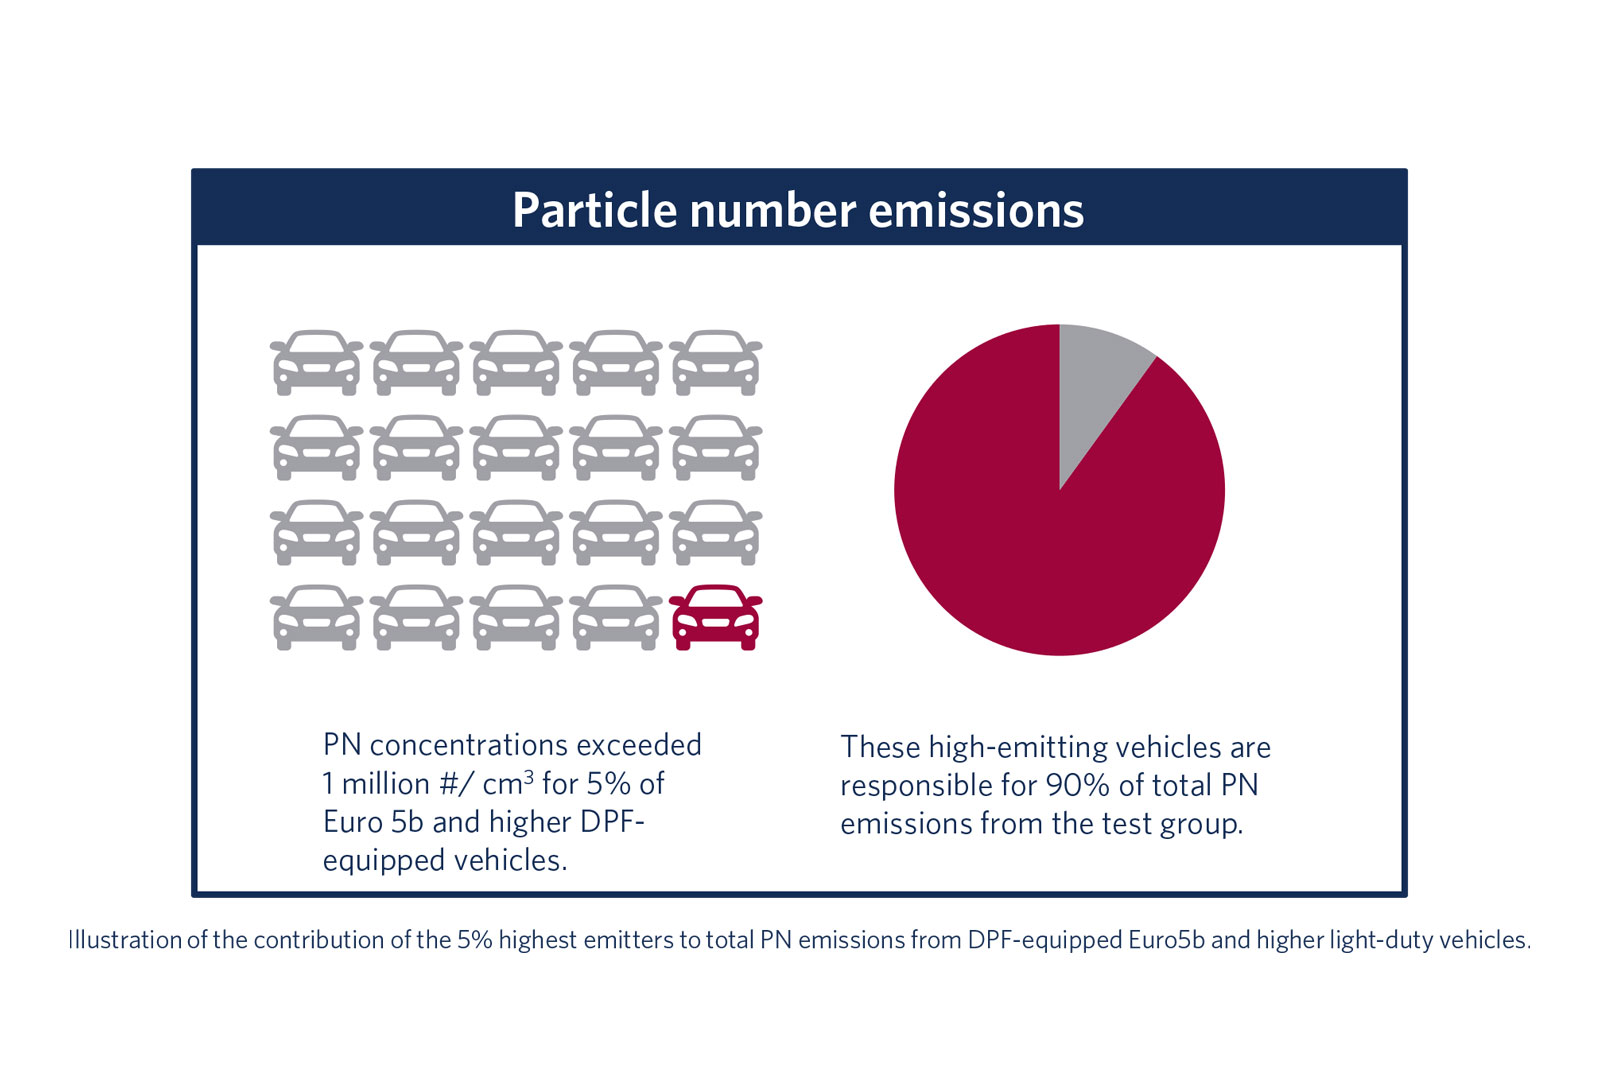 Illustration of the contribution of the 5% highest emitters to total PN emissions from DPF-equipped Euro5b and higher light-duty vehicles.